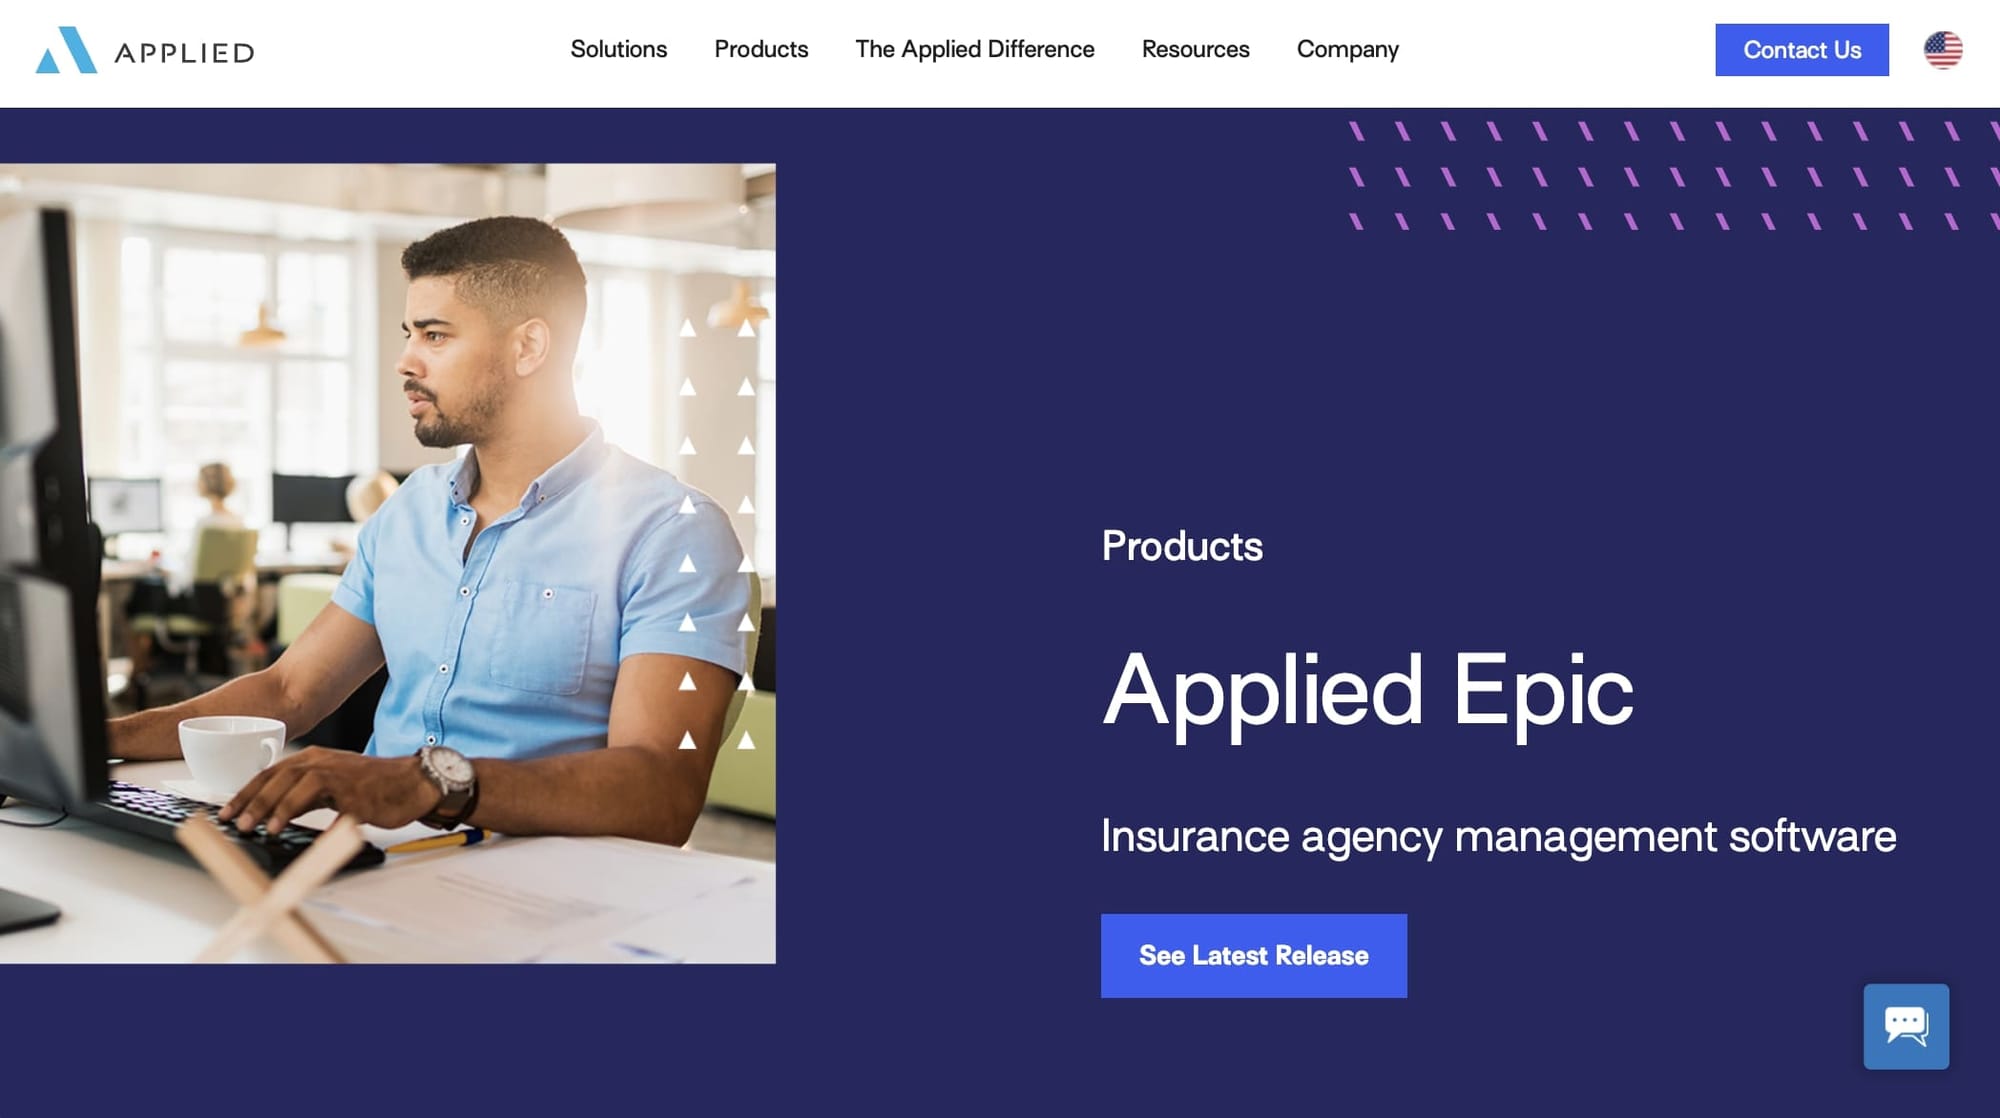 Applied Epic insurance agency management software